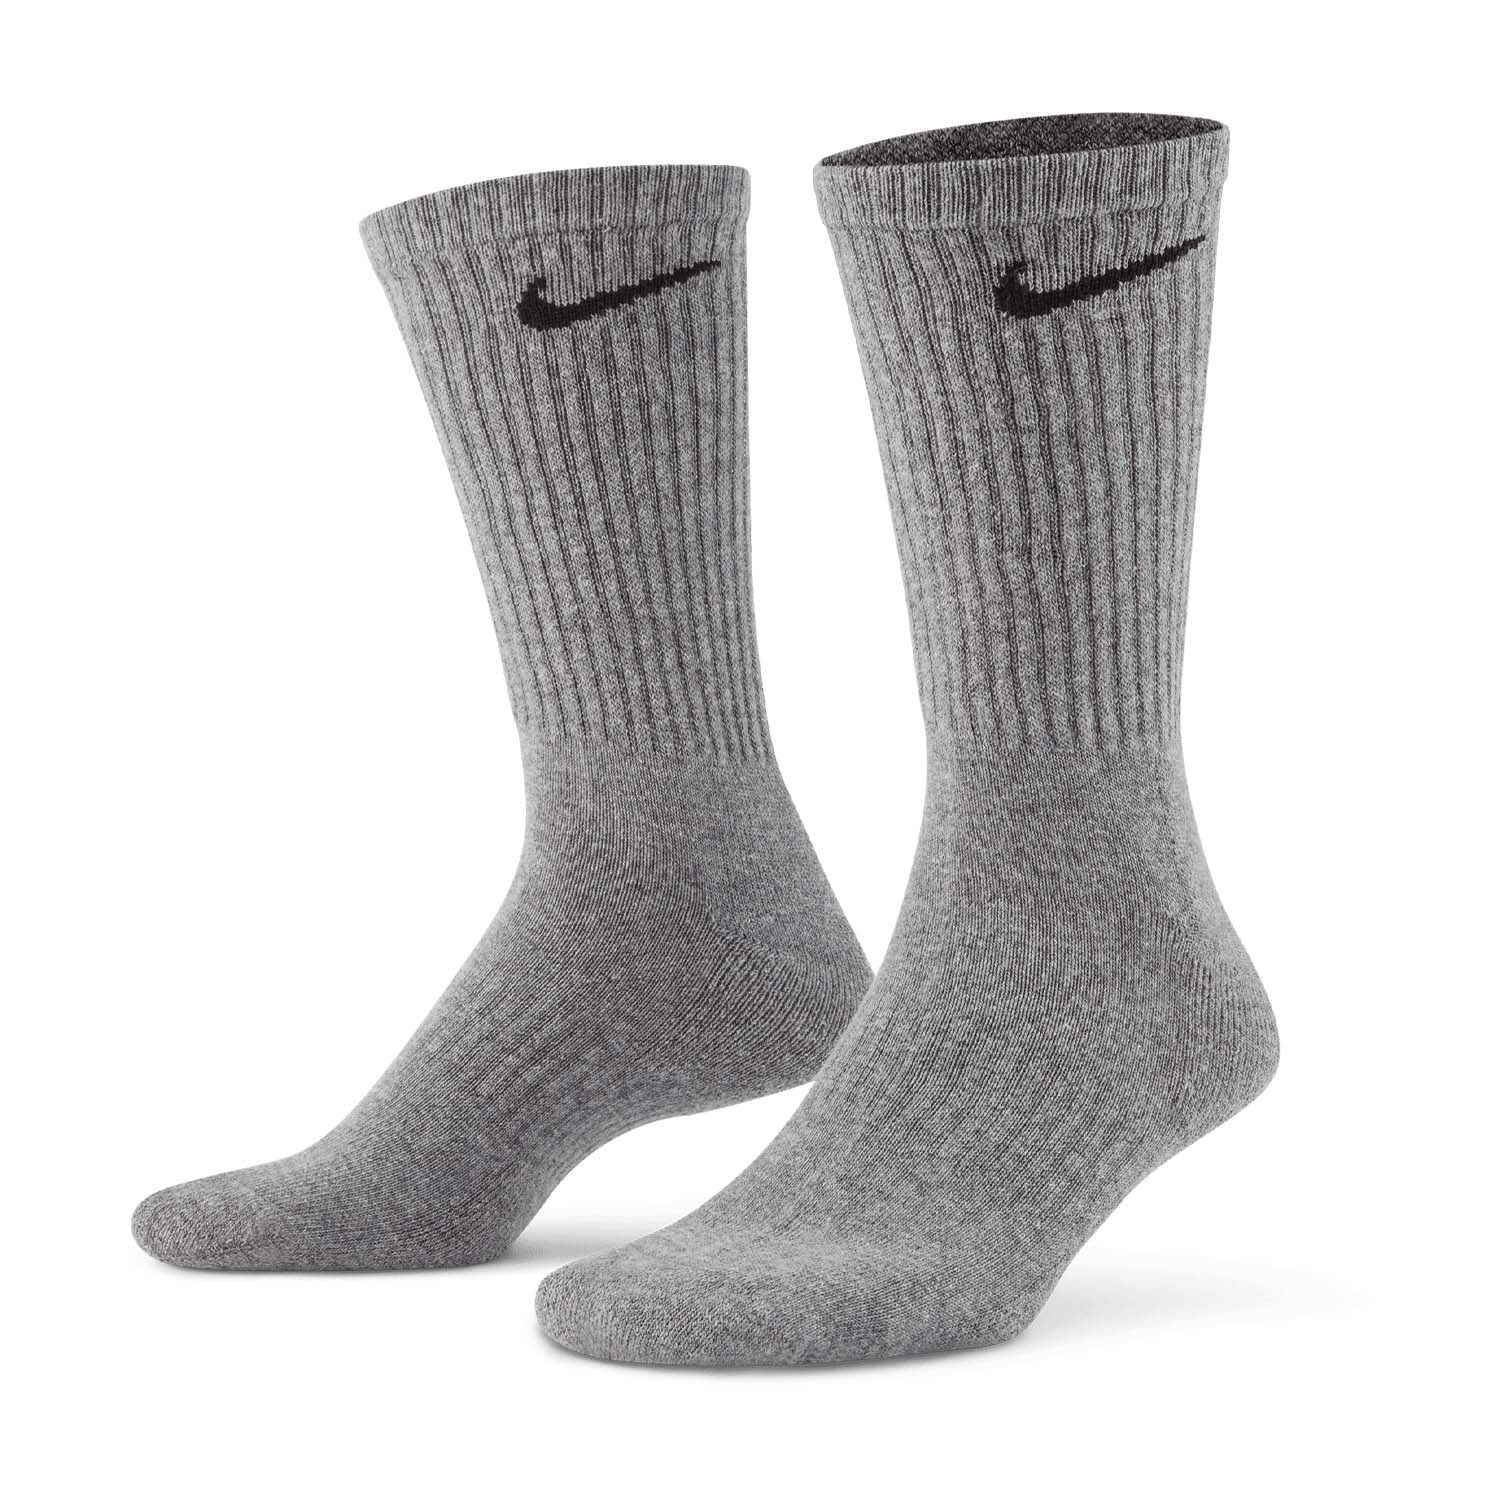 Nike Everyday Cushioned Crew x 3 Calze - Carbon Heather/Black